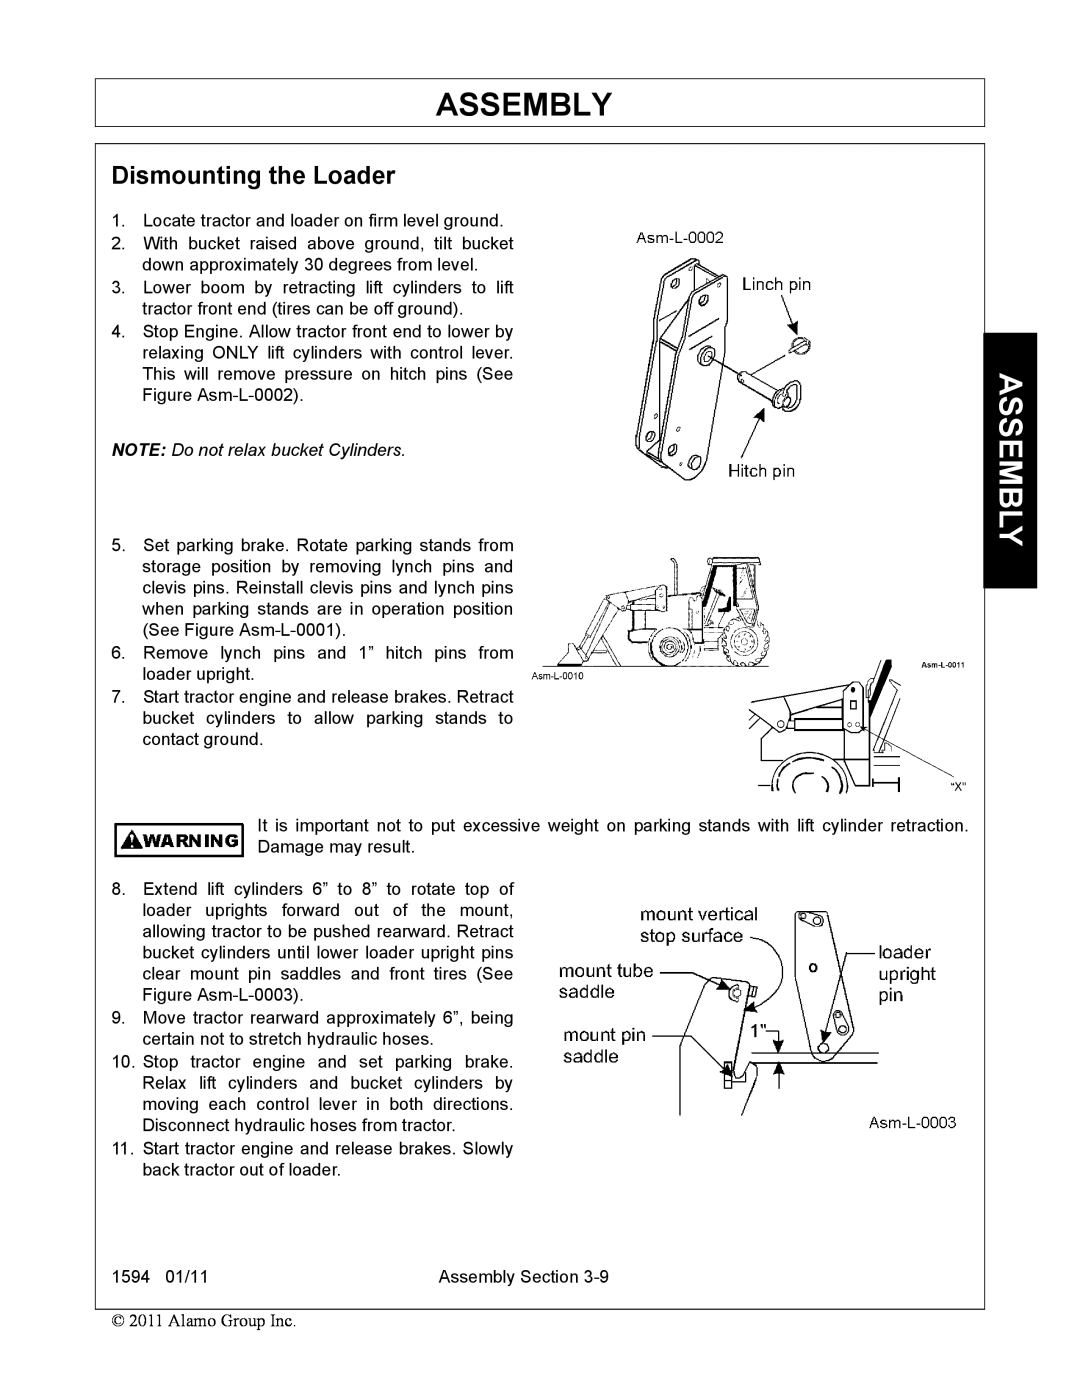 Rhino Mounts 1594 manual Assembly, Dismounting the Loader, NOTE Do not relax bucket Cylinders 